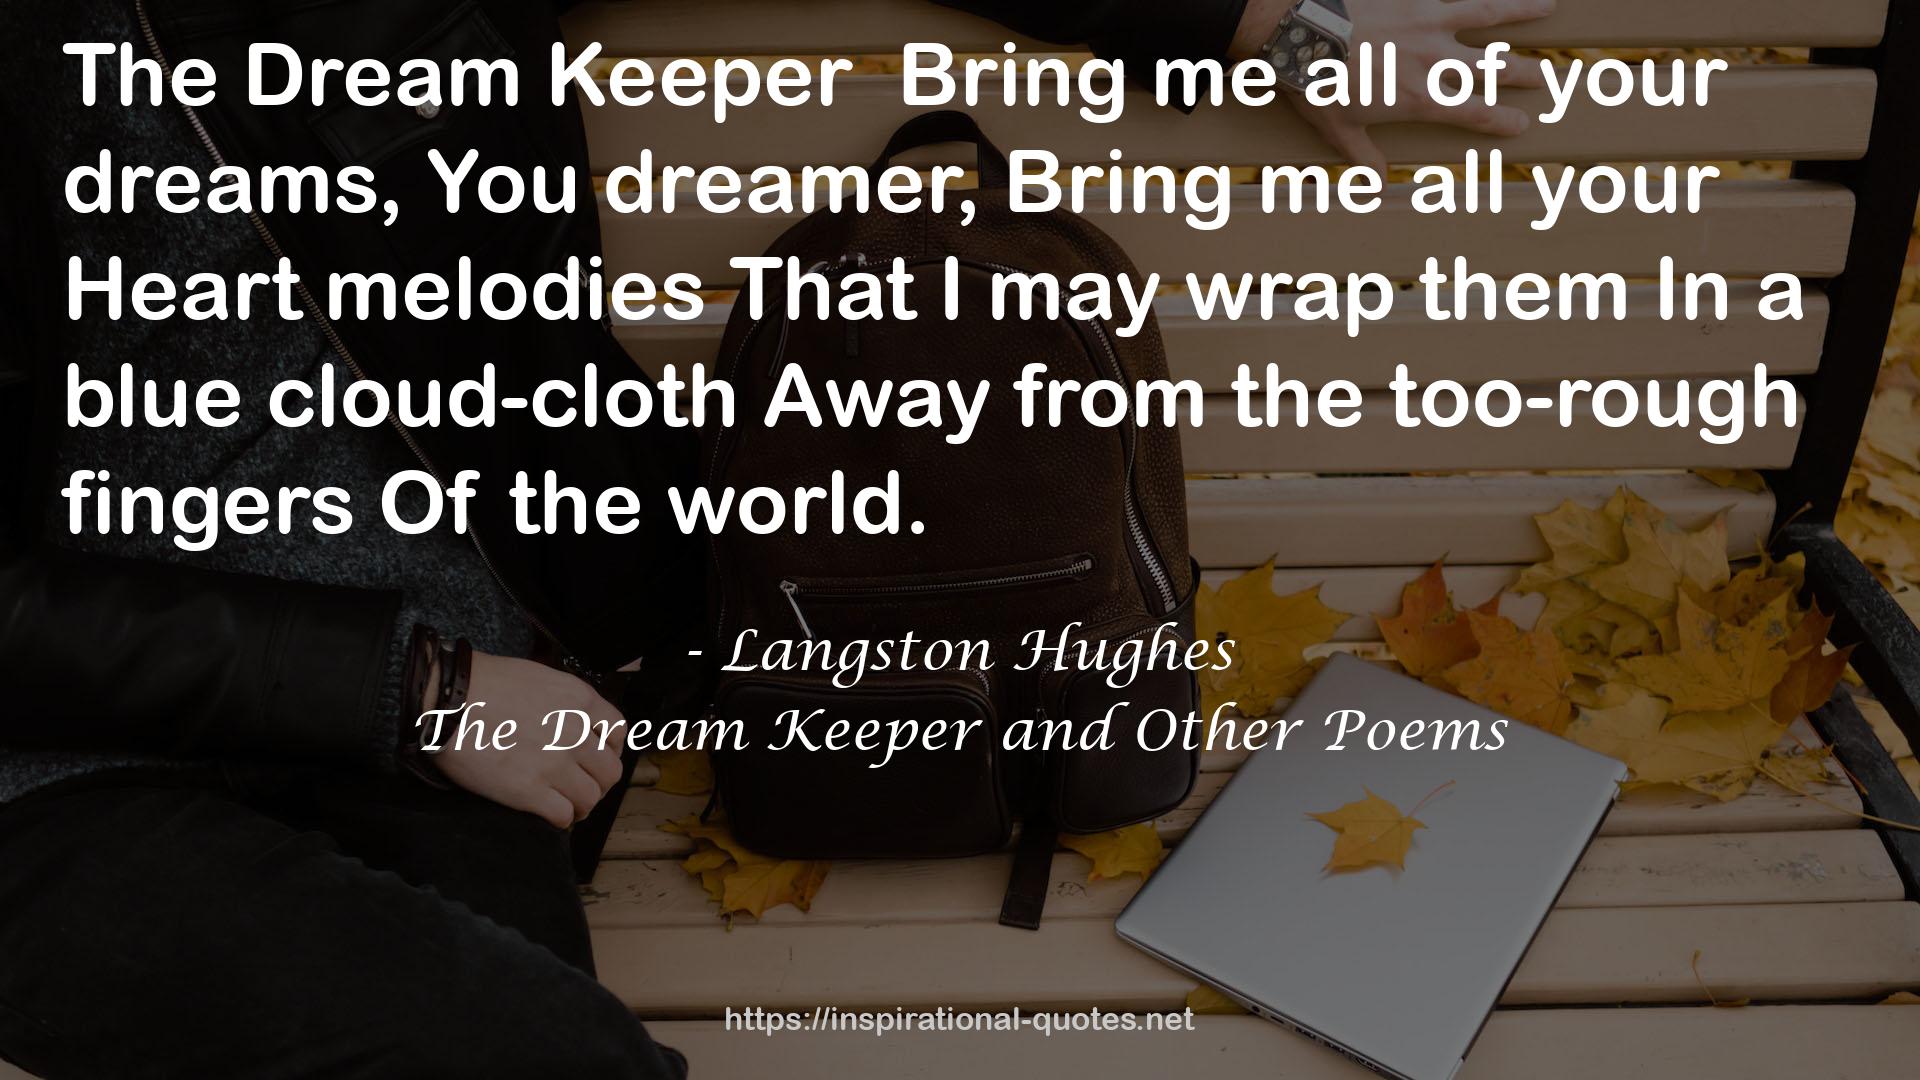 The Dream Keeper and Other Poems QUOTES